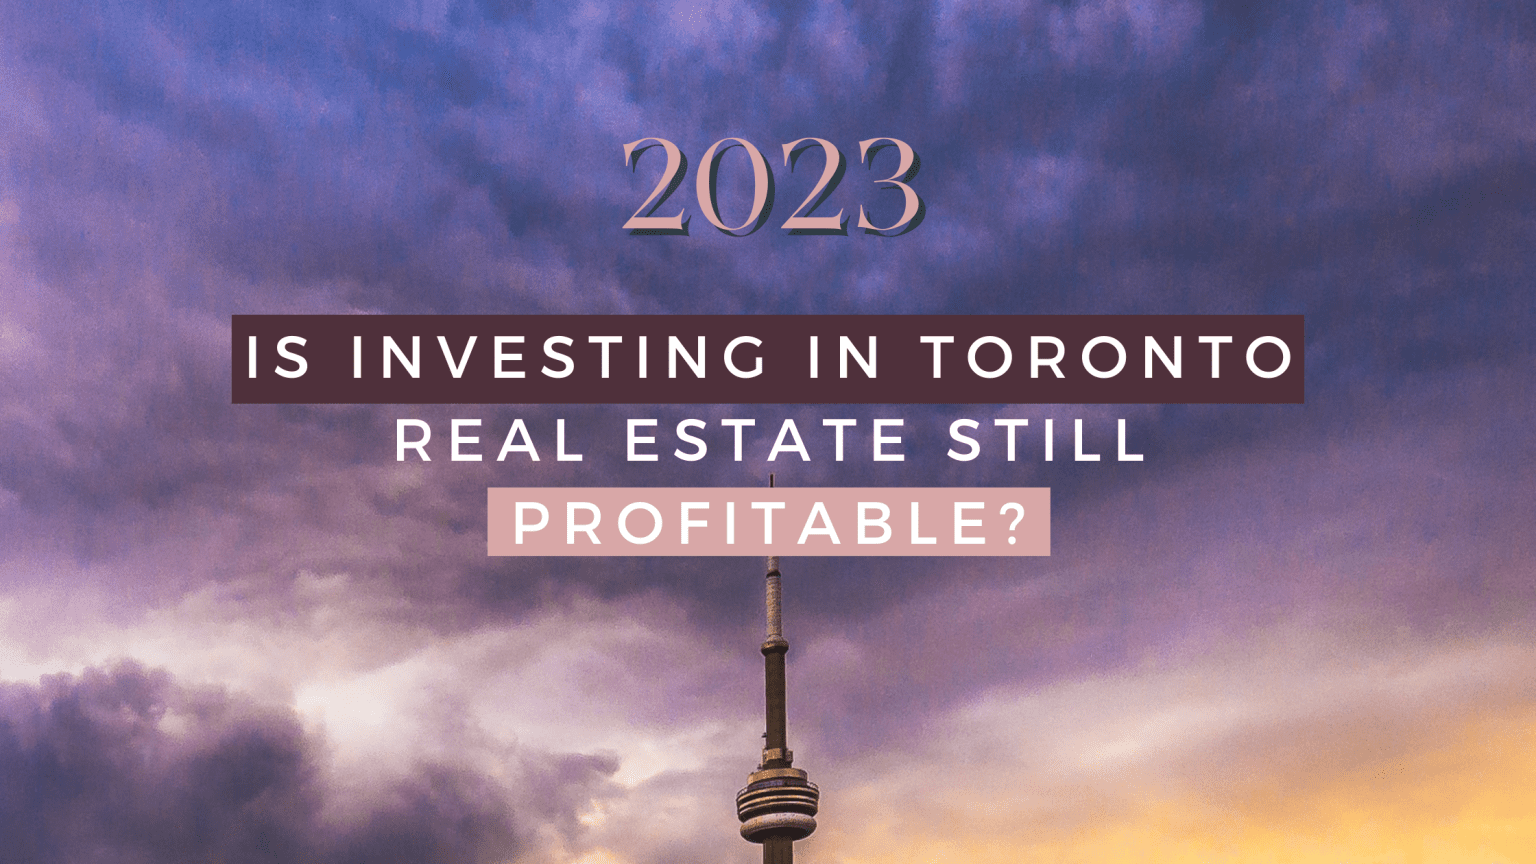 Are real estate investments in Toronto in 2023 profitable?